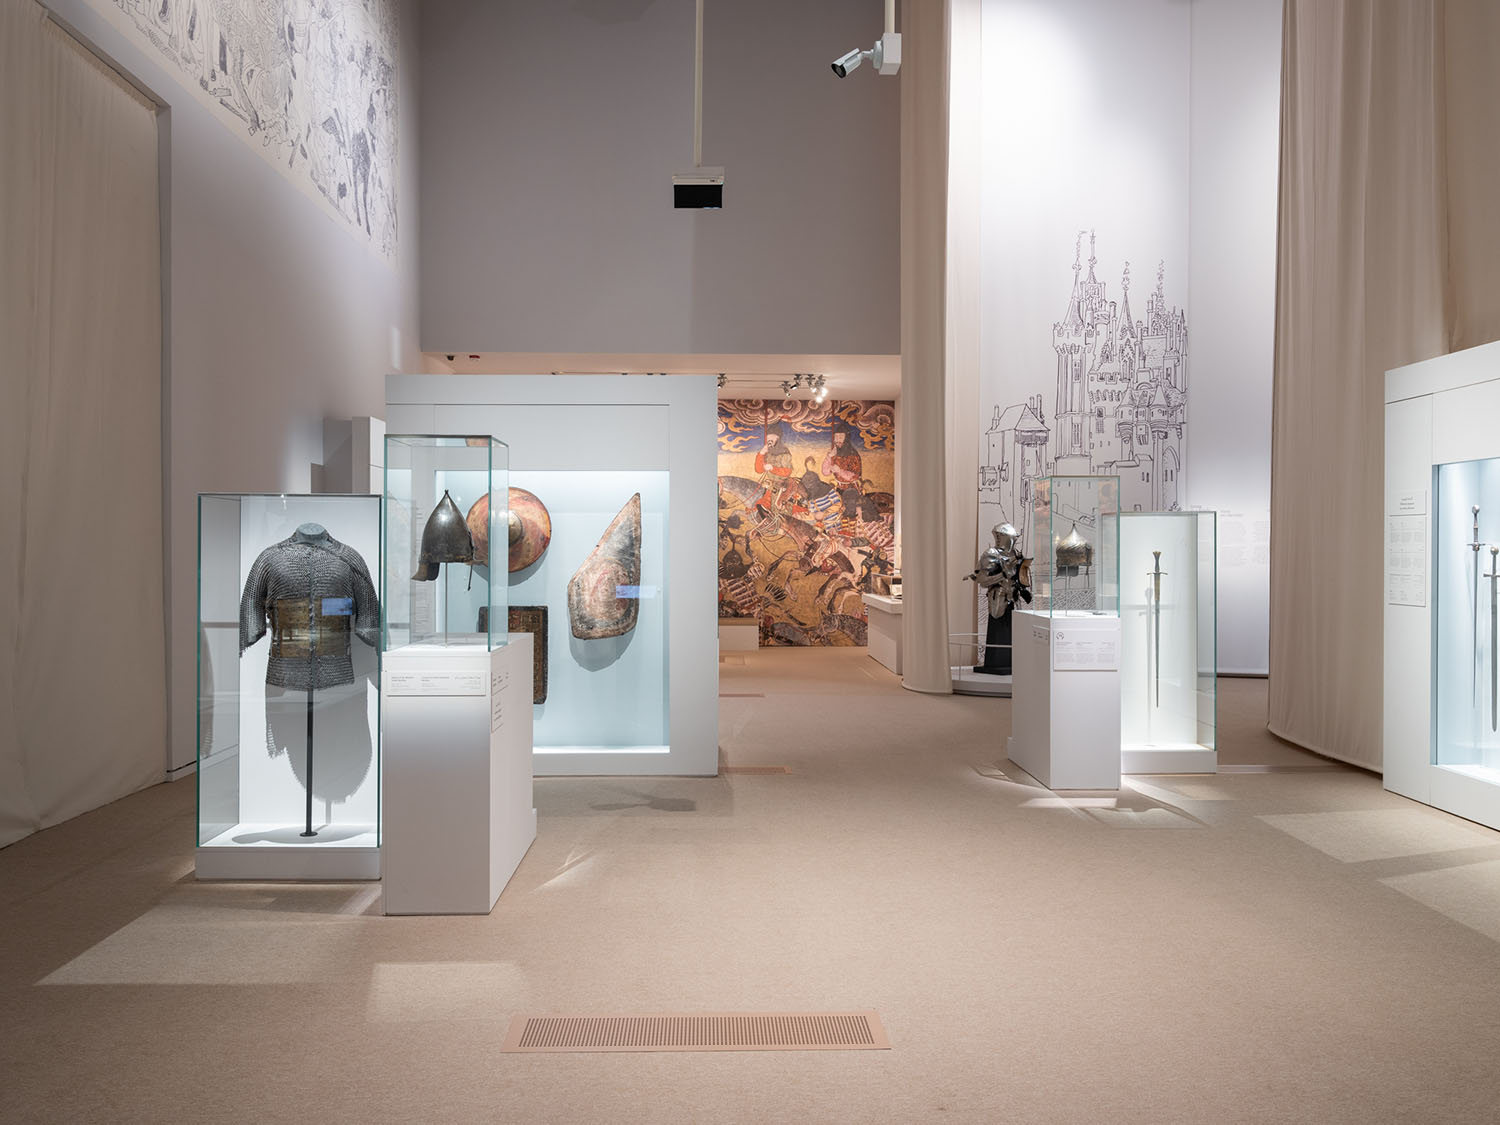 Exhibition “Furusiyya: The Art of Chivalry between East and West” organized by Louvre Abu Dhabi, Musée de Cluny and France Muséums in 2020